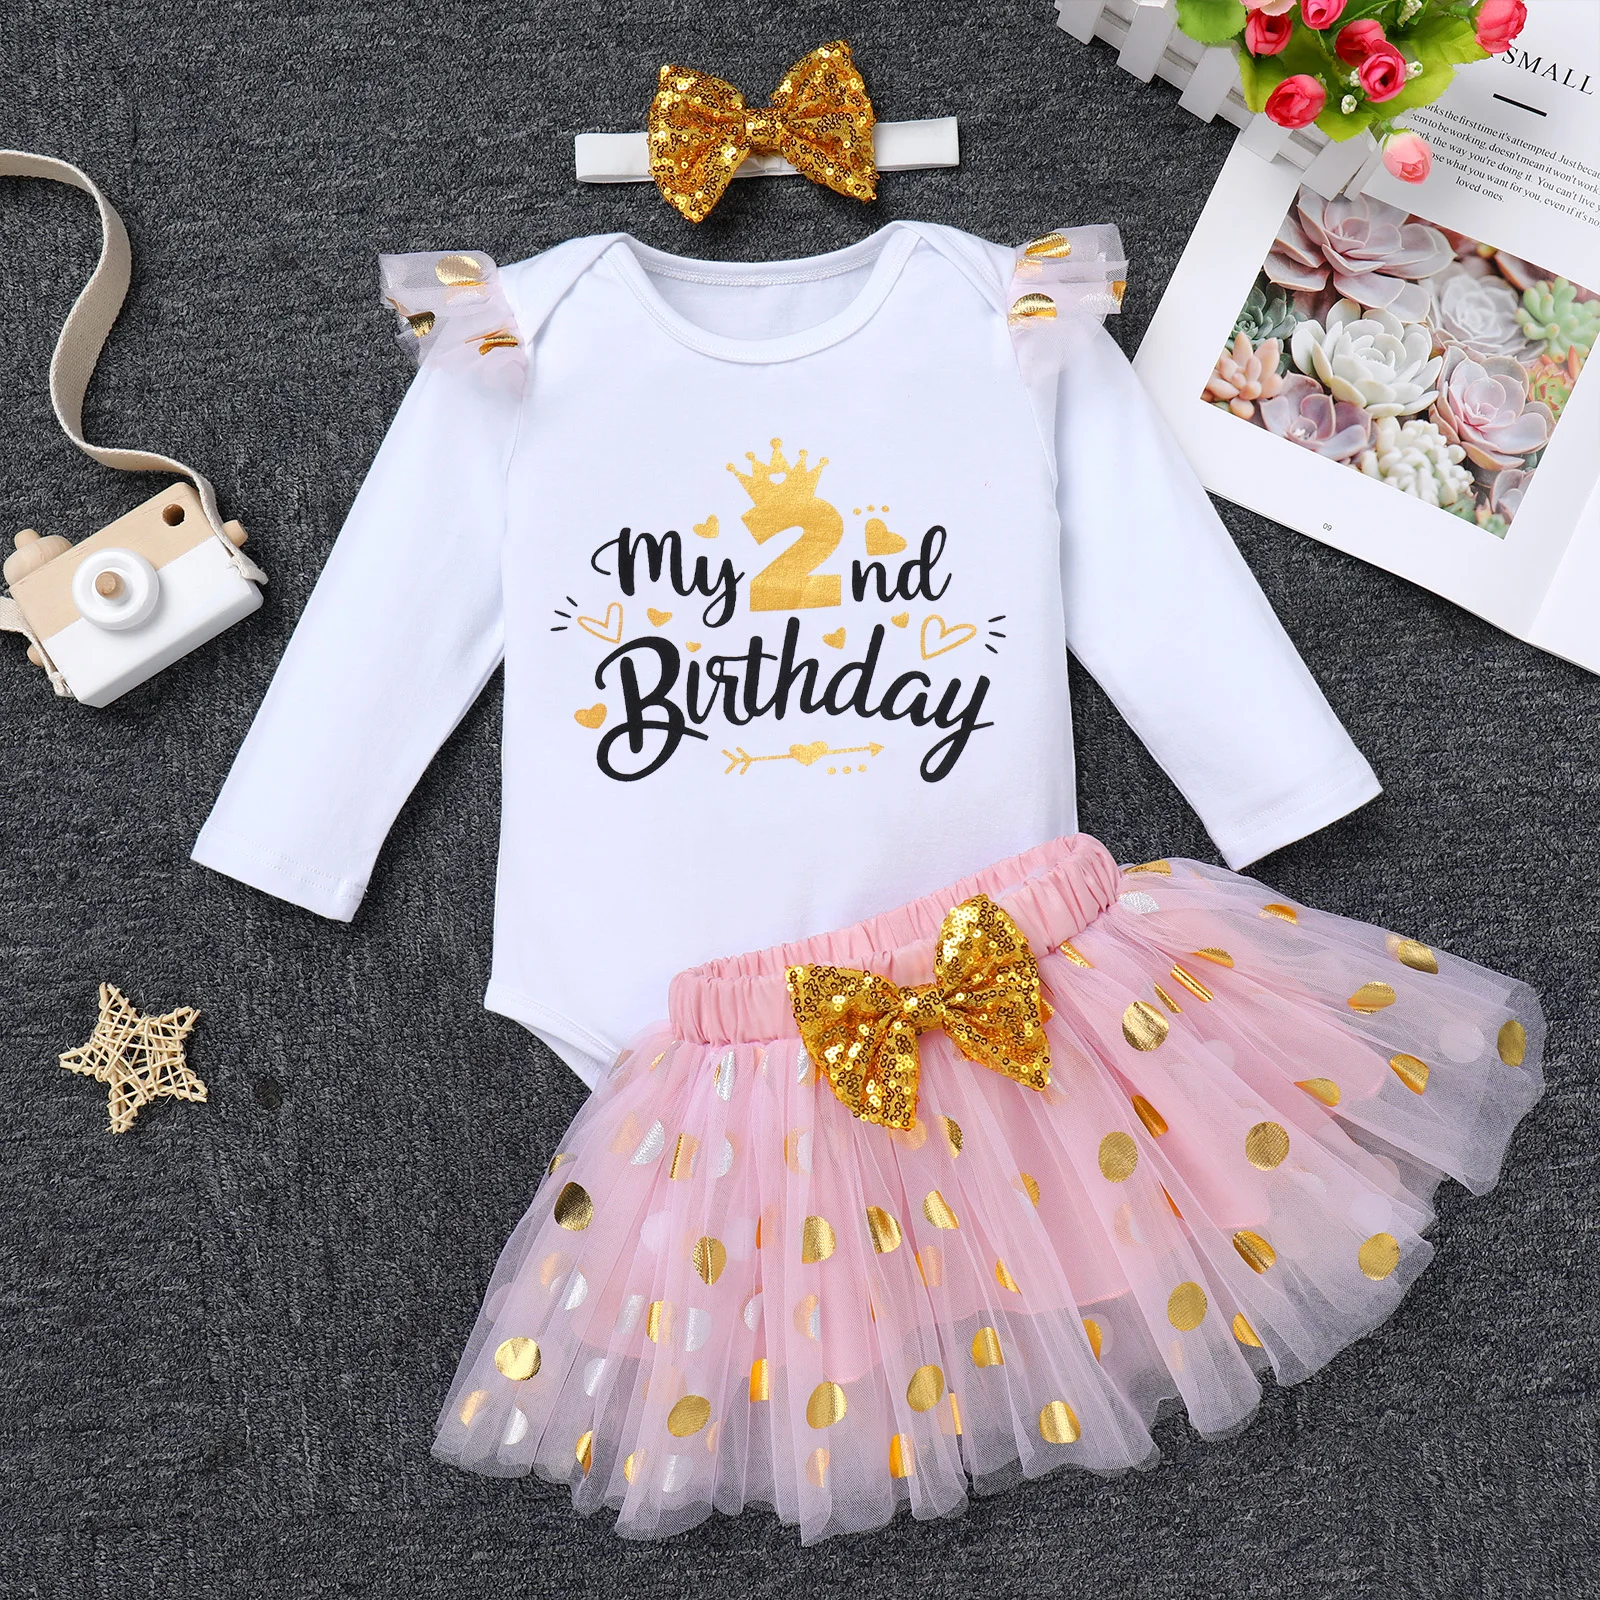 6M-2Y Baby Girls Birthday Outfit Long Sleeve Letters Printed Romper Tops With Skirt And Headband 3pcs Sets Cake Smash Dress